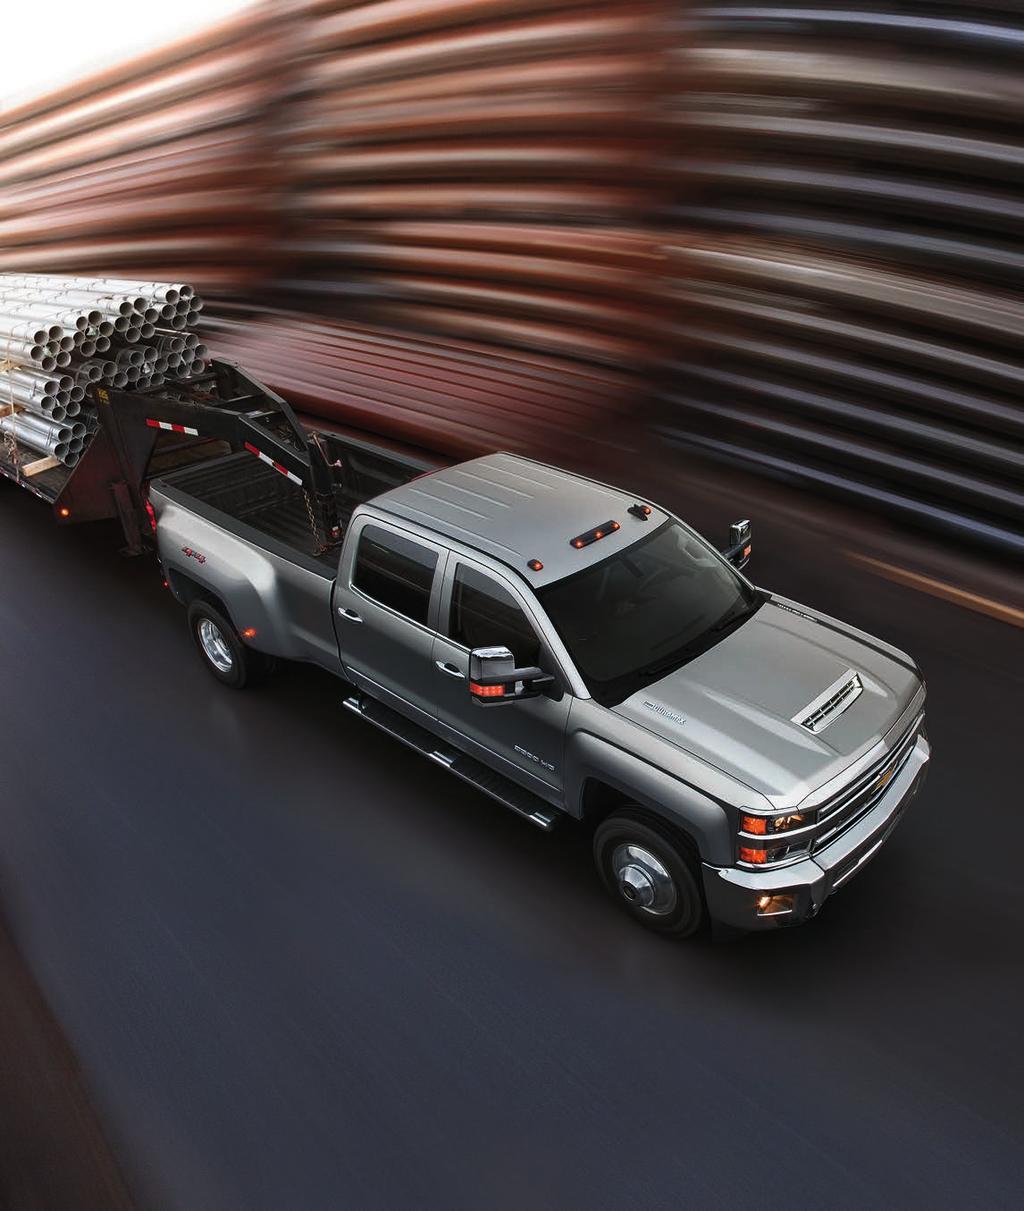 IN THE TOWING WORLD, CONFIDENCE MAKES ALL THE DIFFERENCE.